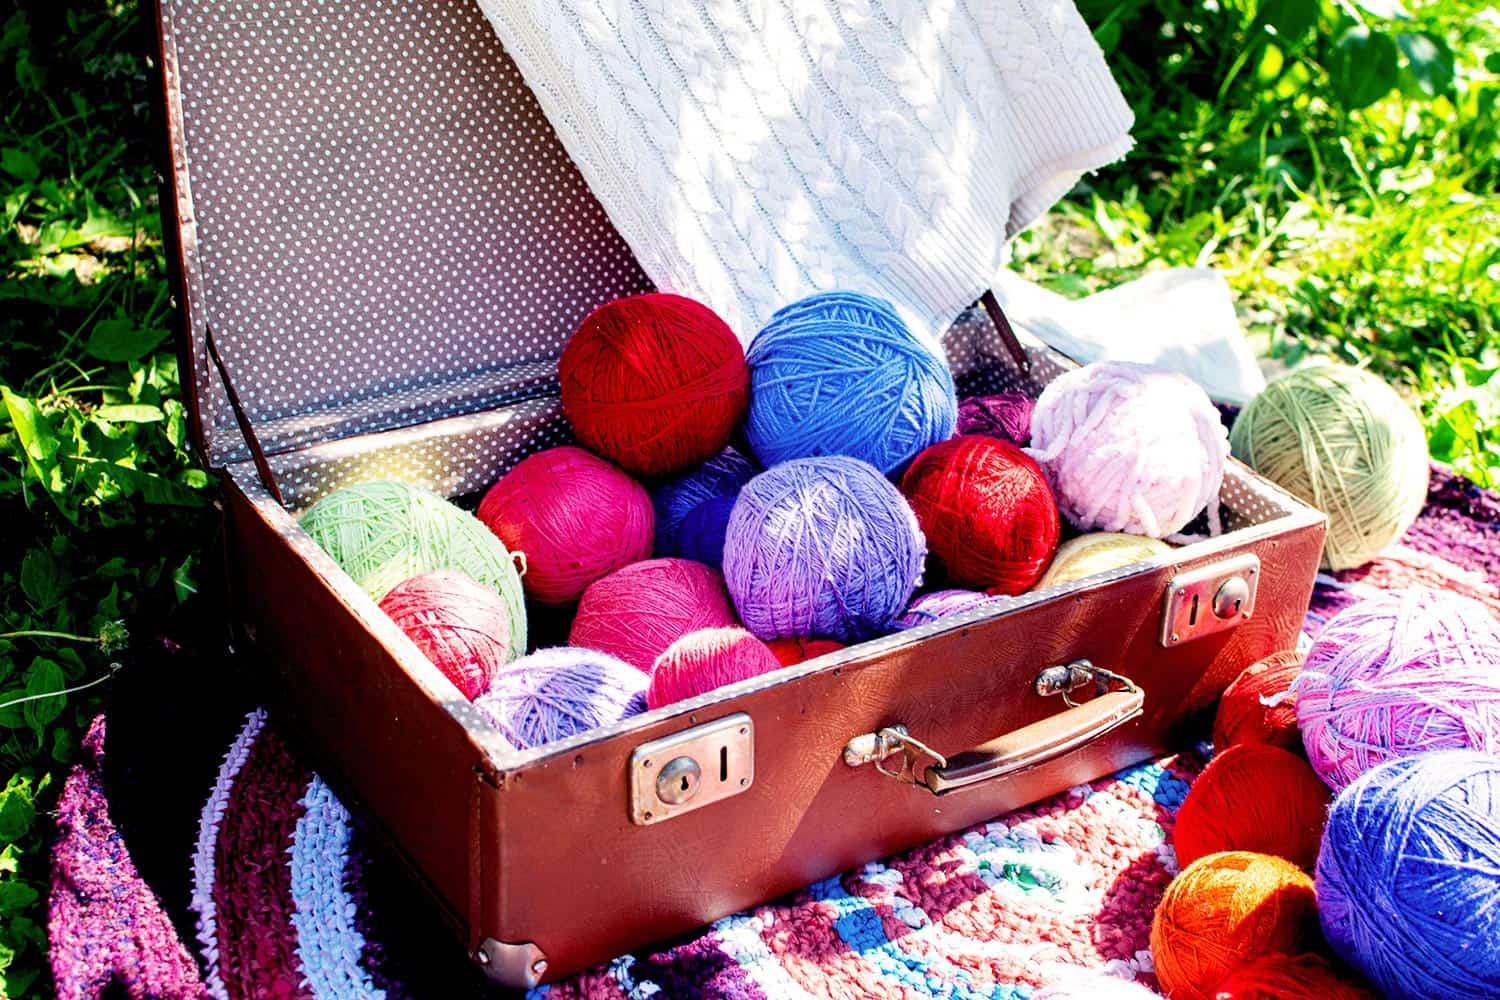 Balls of colored multicolored yarn in an old suitcase